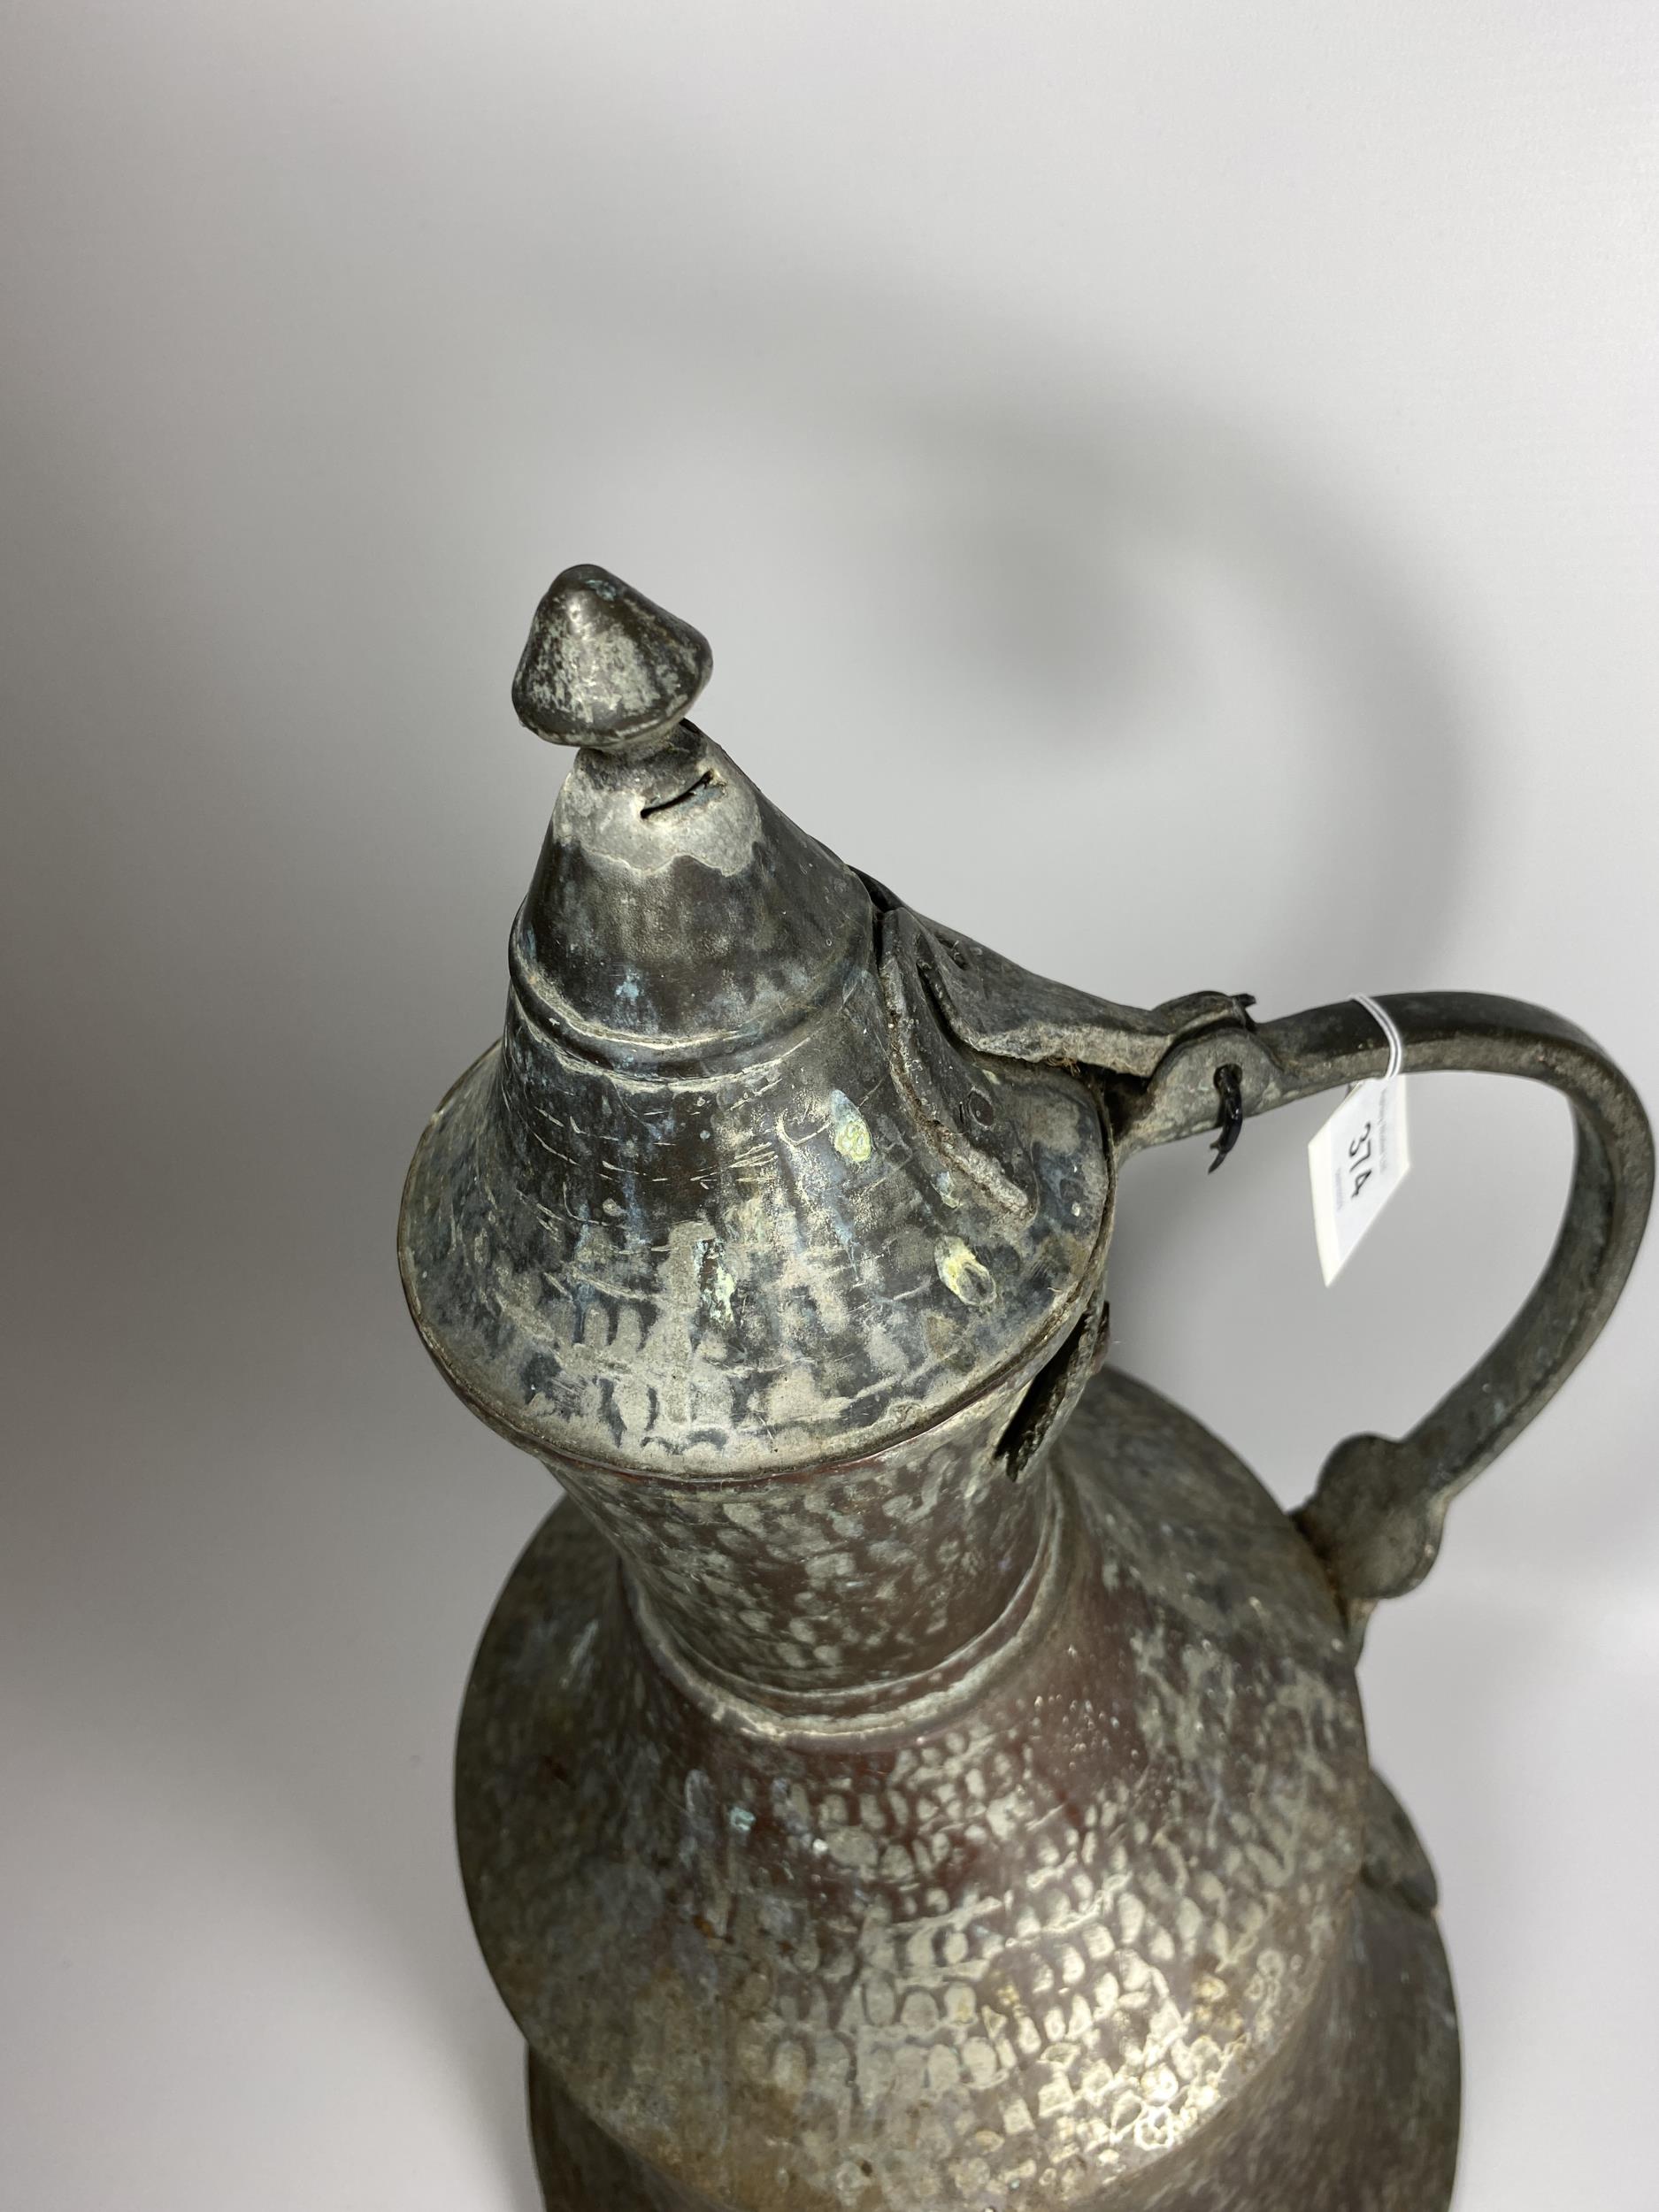 A LARGE LATE 19TH / EARLY 20TH CENTURY MIDDLE EASTERN COPPER WATER VESSEL, HEIGHT 50CM - Image 2 of 3